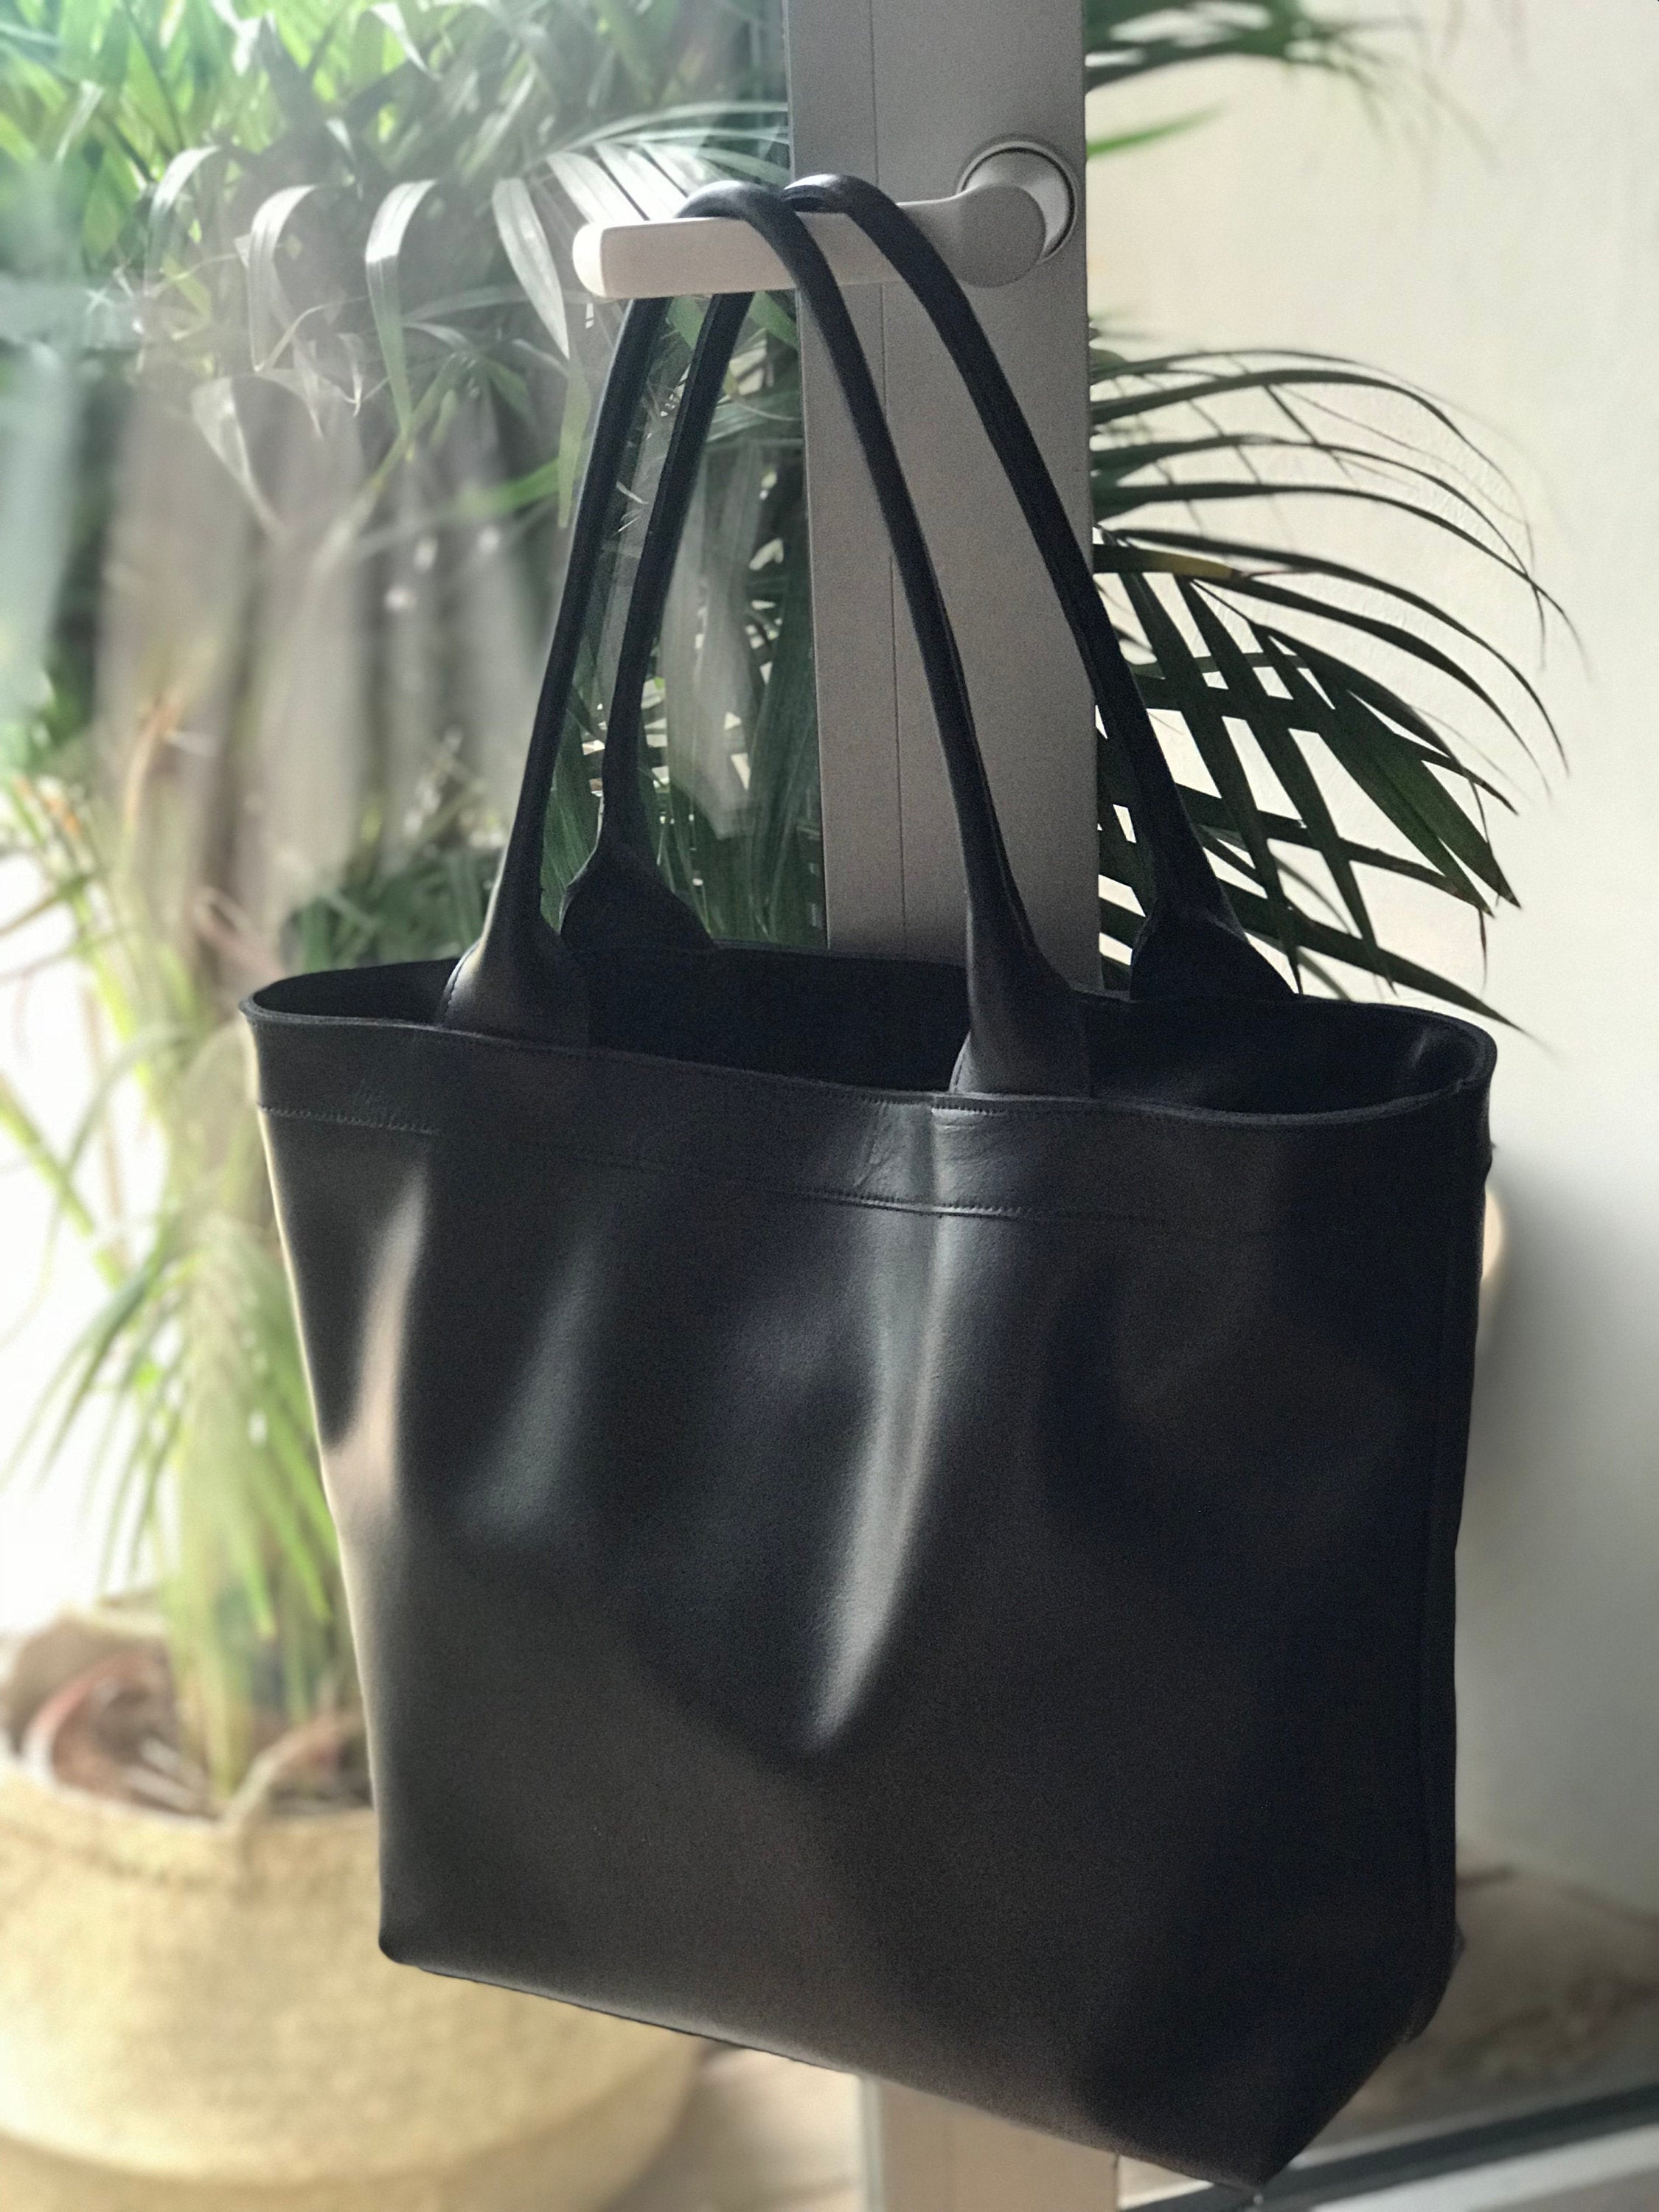 Black Leather Tote Bag with Zipper and Inside Lining. Leather Purse. Handmade.